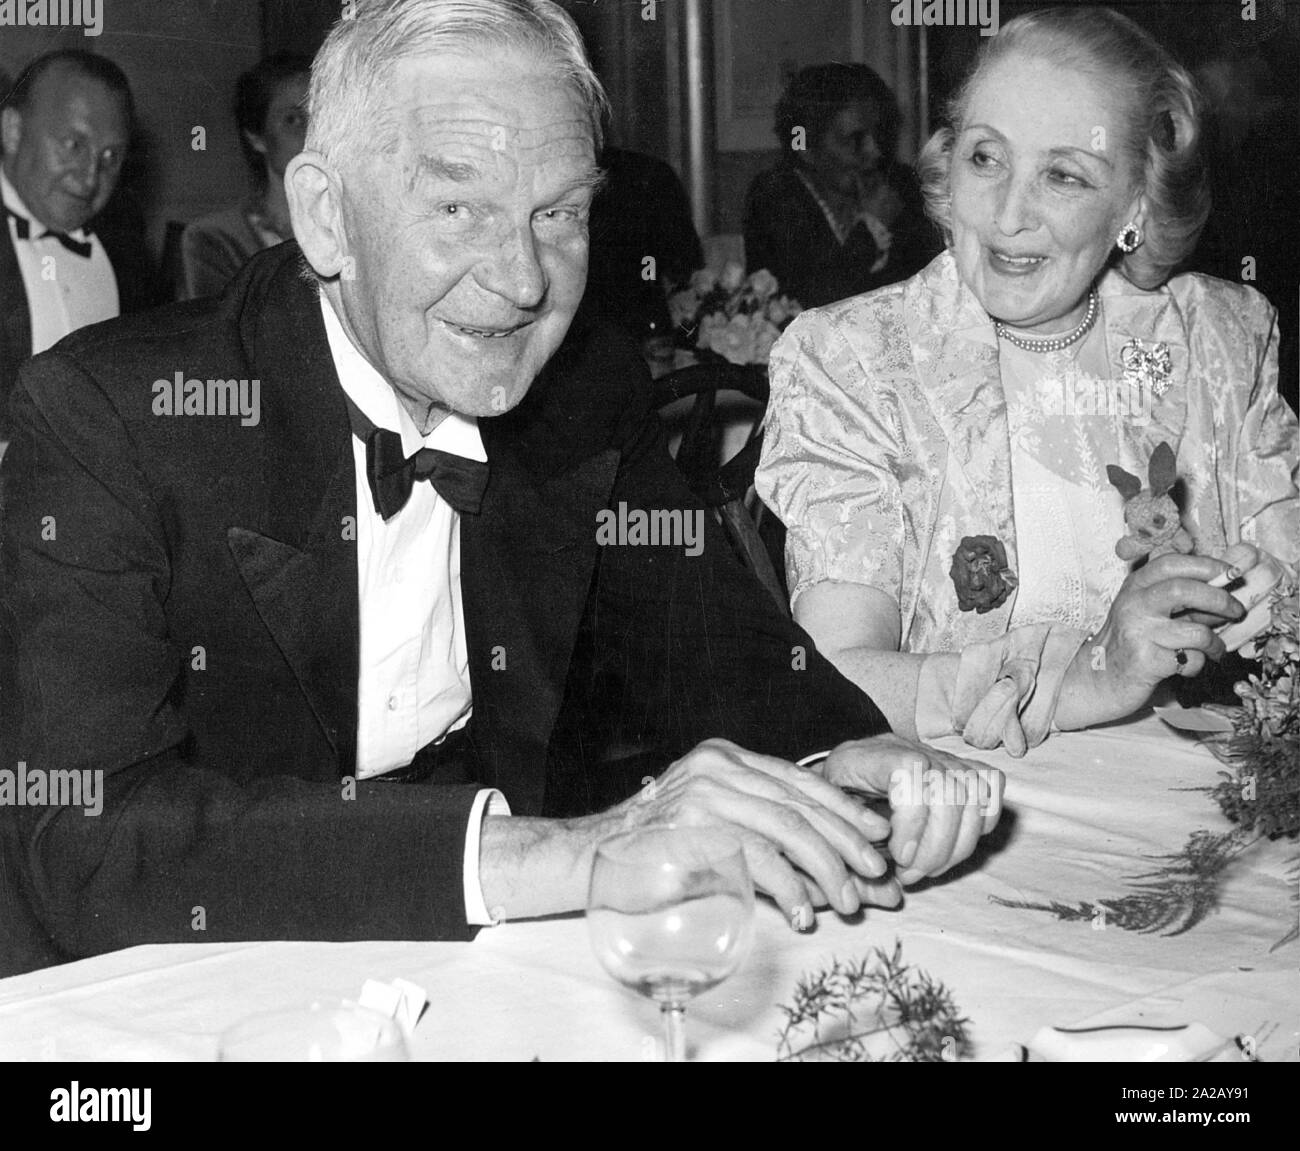 The chemist and Nobel Prize winner Frederick Soddy (1877-1956) together with Muriel Hondler, editor of the magazine "Atomic Energy", at a dinner. Stock Photo